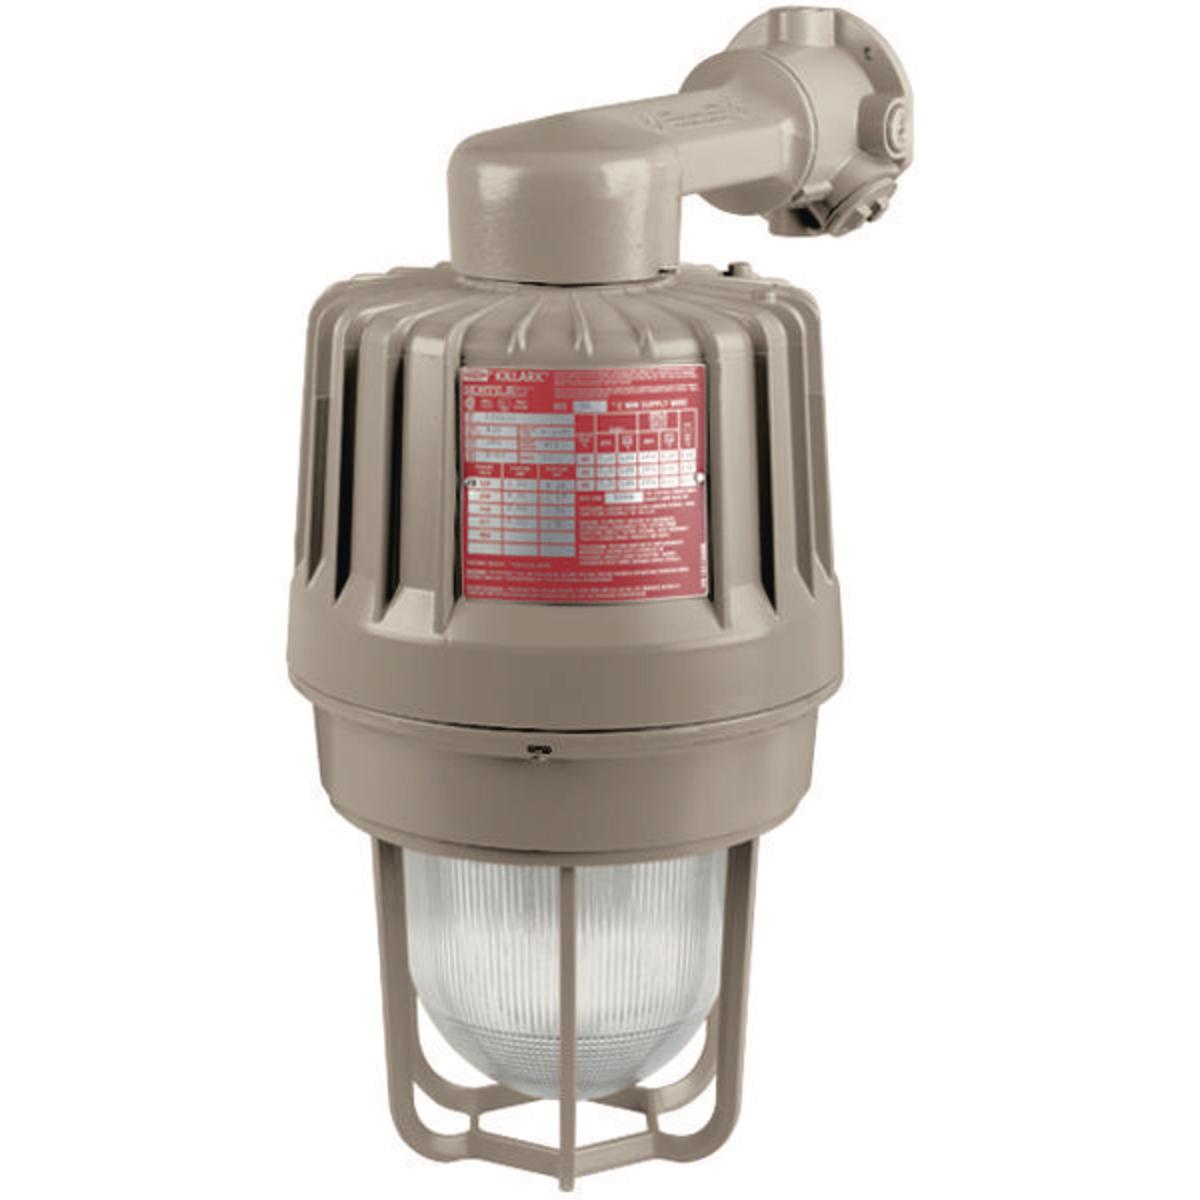 Hubbell EZP176B2G 175W 120/277/347V Pulse-Start Metal Halide 3/4" Wall Mount with Guard  ; Three light sources – High Pressure Sodium (50-400W), Metal Halide (70-400W) and Pulse Start Metal Halide (175-400W) ; Mounting choice –Pendant, ceiling, 25˚ stanchion or 90˚ wall mo